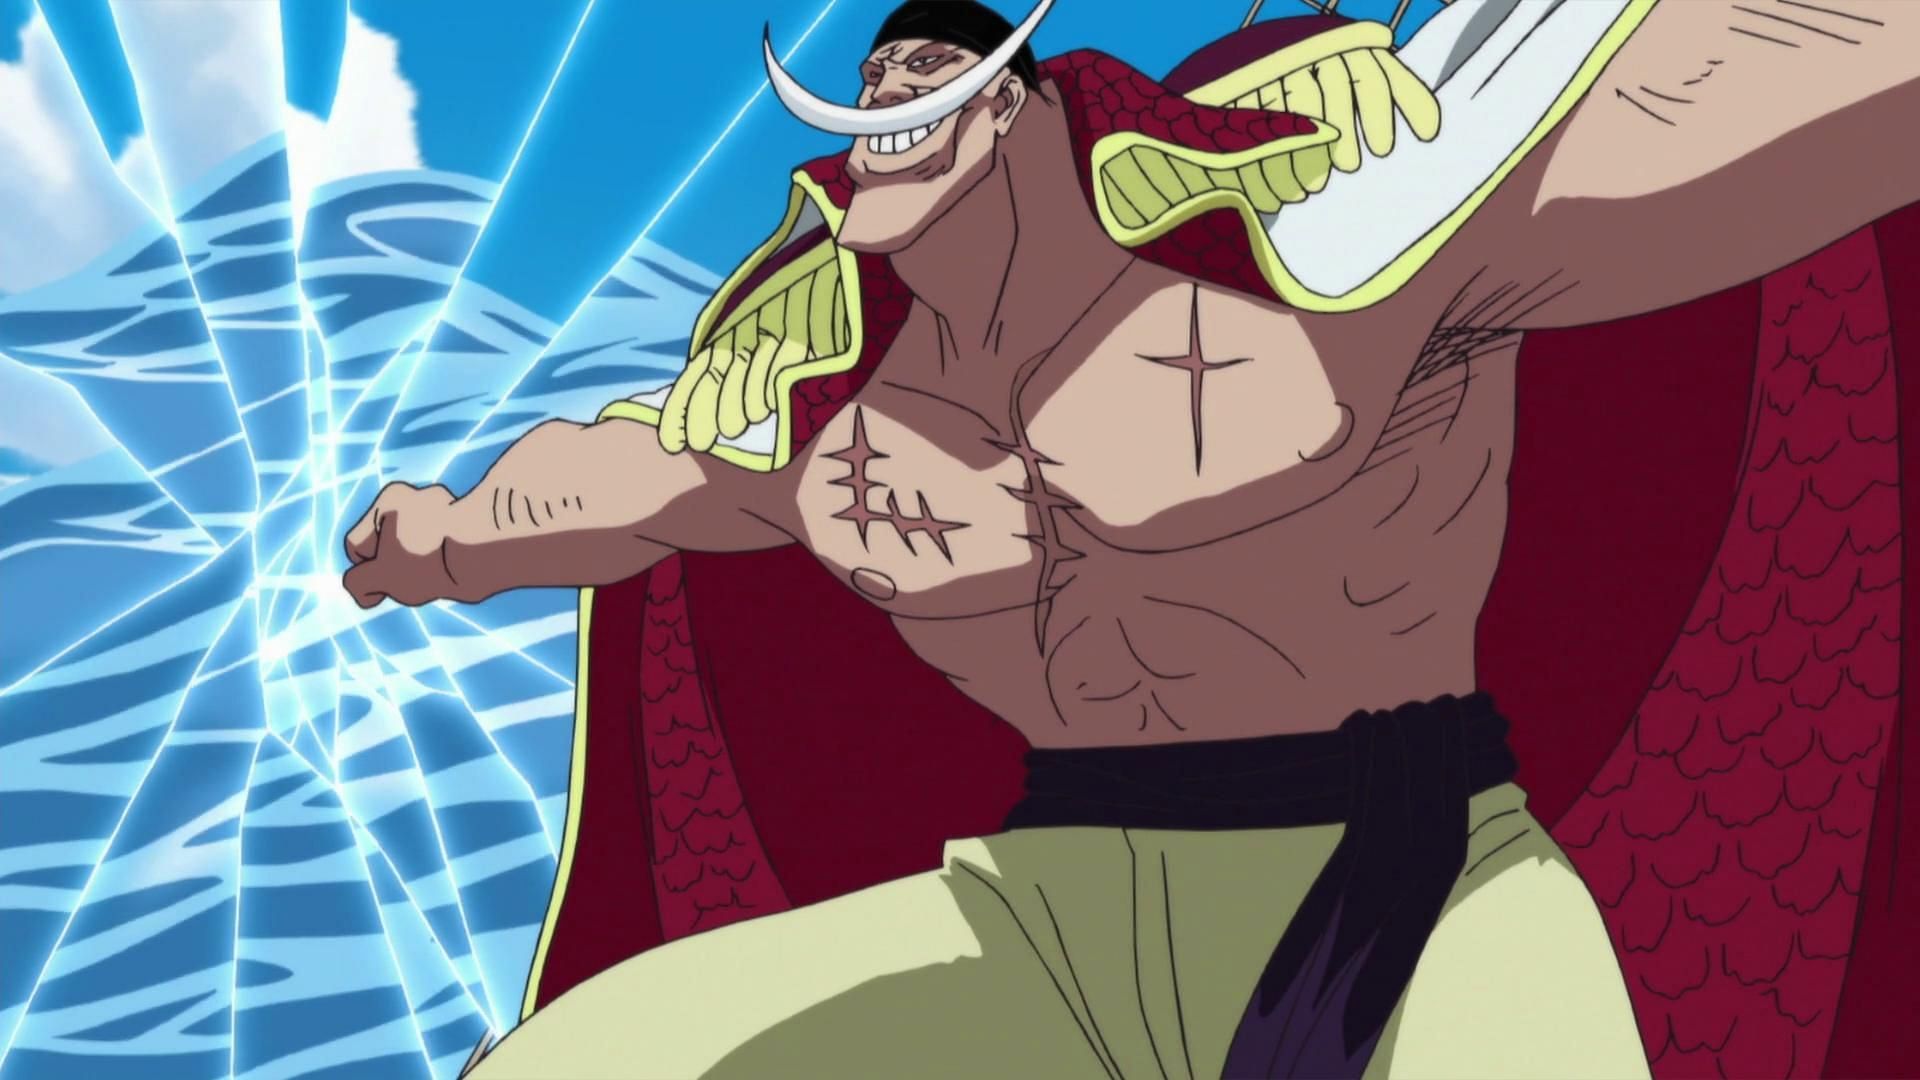 The devastating Tremor-Tremor Fruit from the Paramecia-class has the power to potentially destroy the world of One Piece (Image via Toei Animation, One Piece)